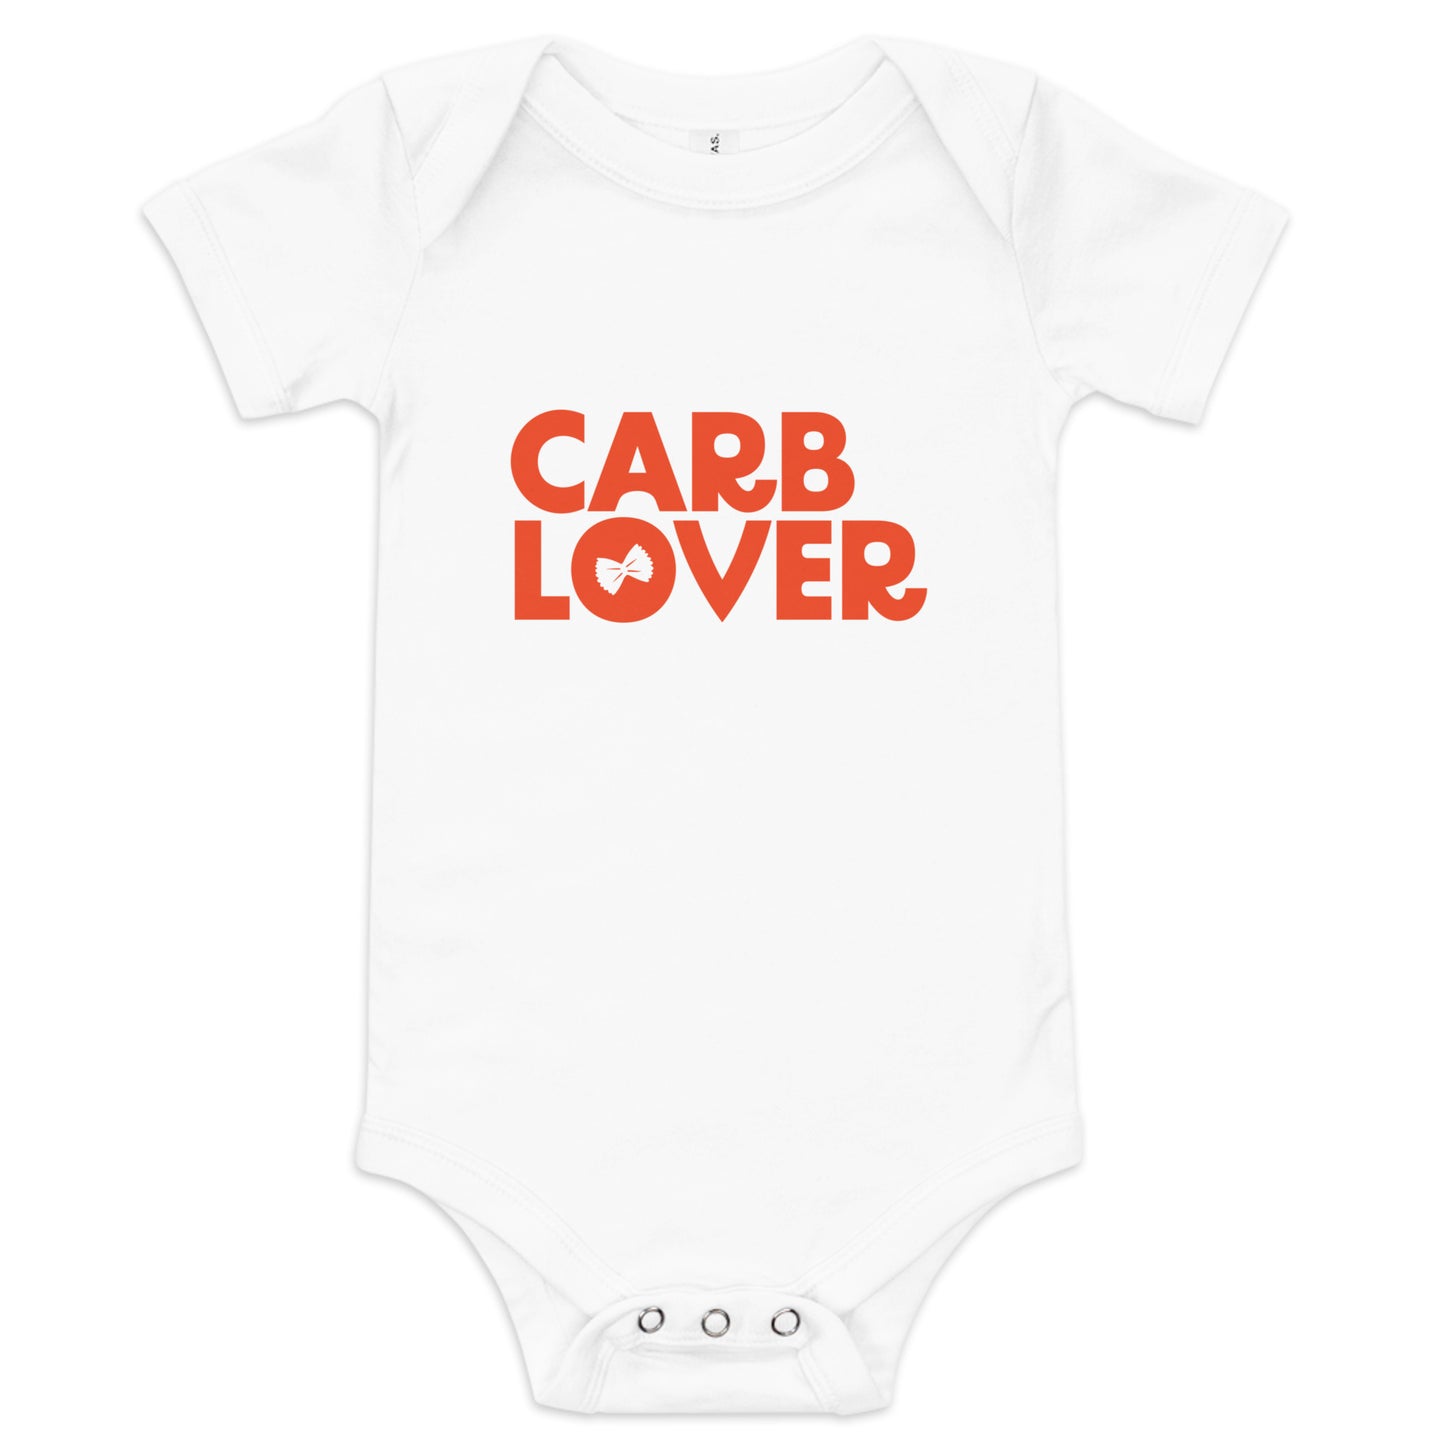 Carb Lover - Baby Bodysuit